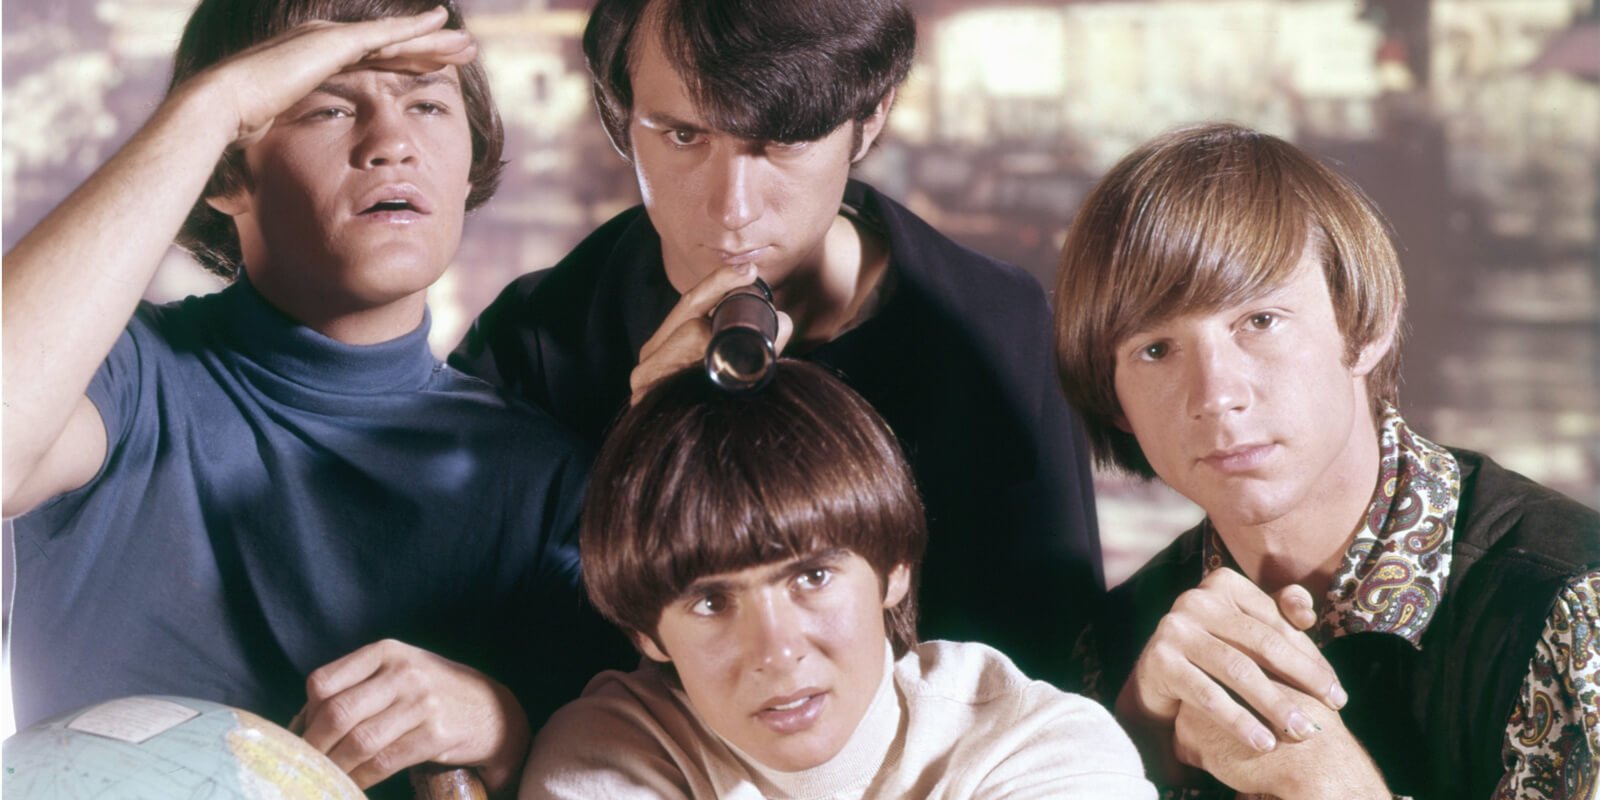 The Monkees' members included Micky Dolenz, Davy Jones, Mike Nesmith, and Peter Tork.